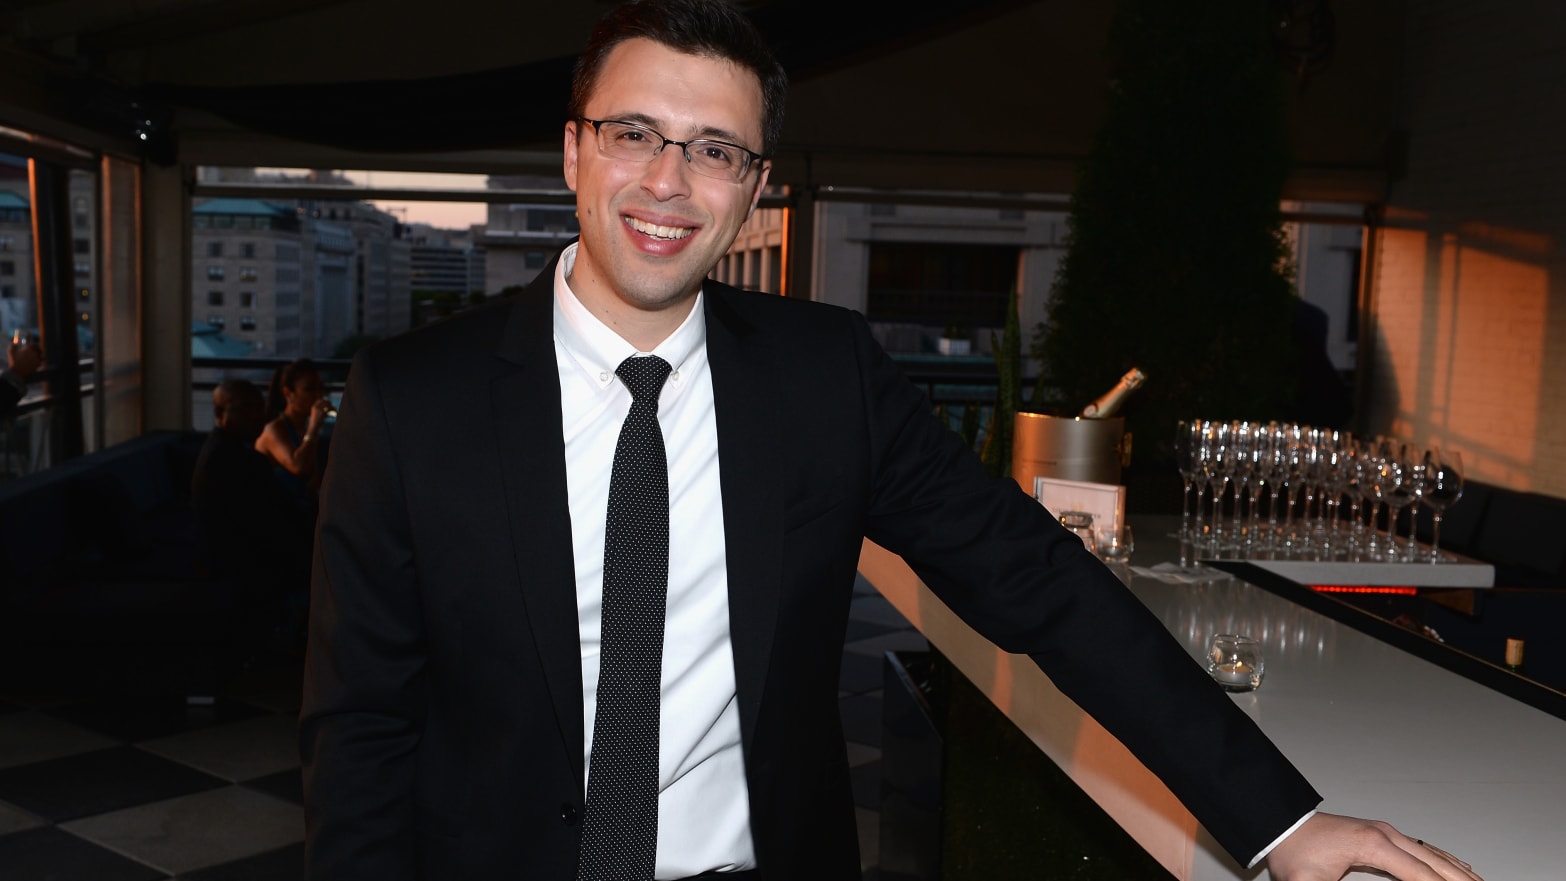 Vox Co-Founder Ezra Klein Leaving for The New York Times